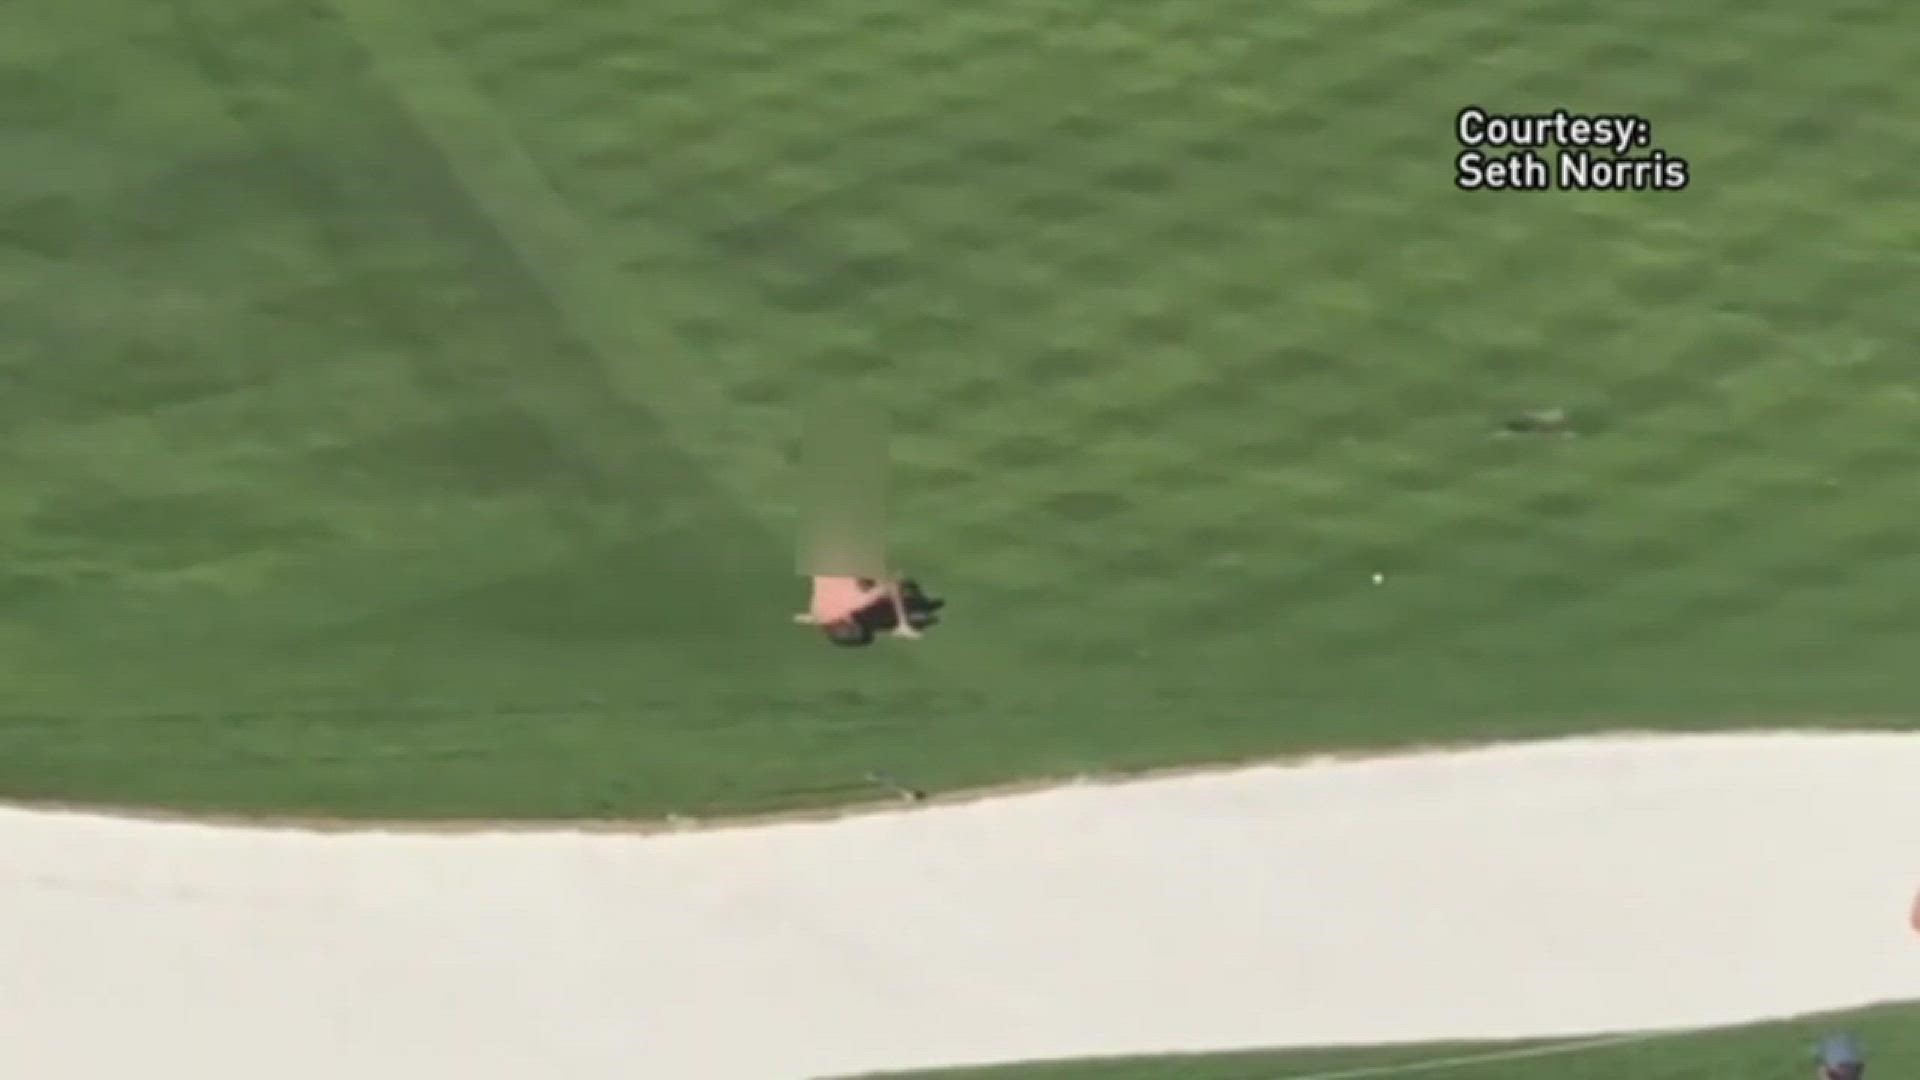 A streaker hit the 17th hole at the Phoenix Open Jan. 31, 2018.